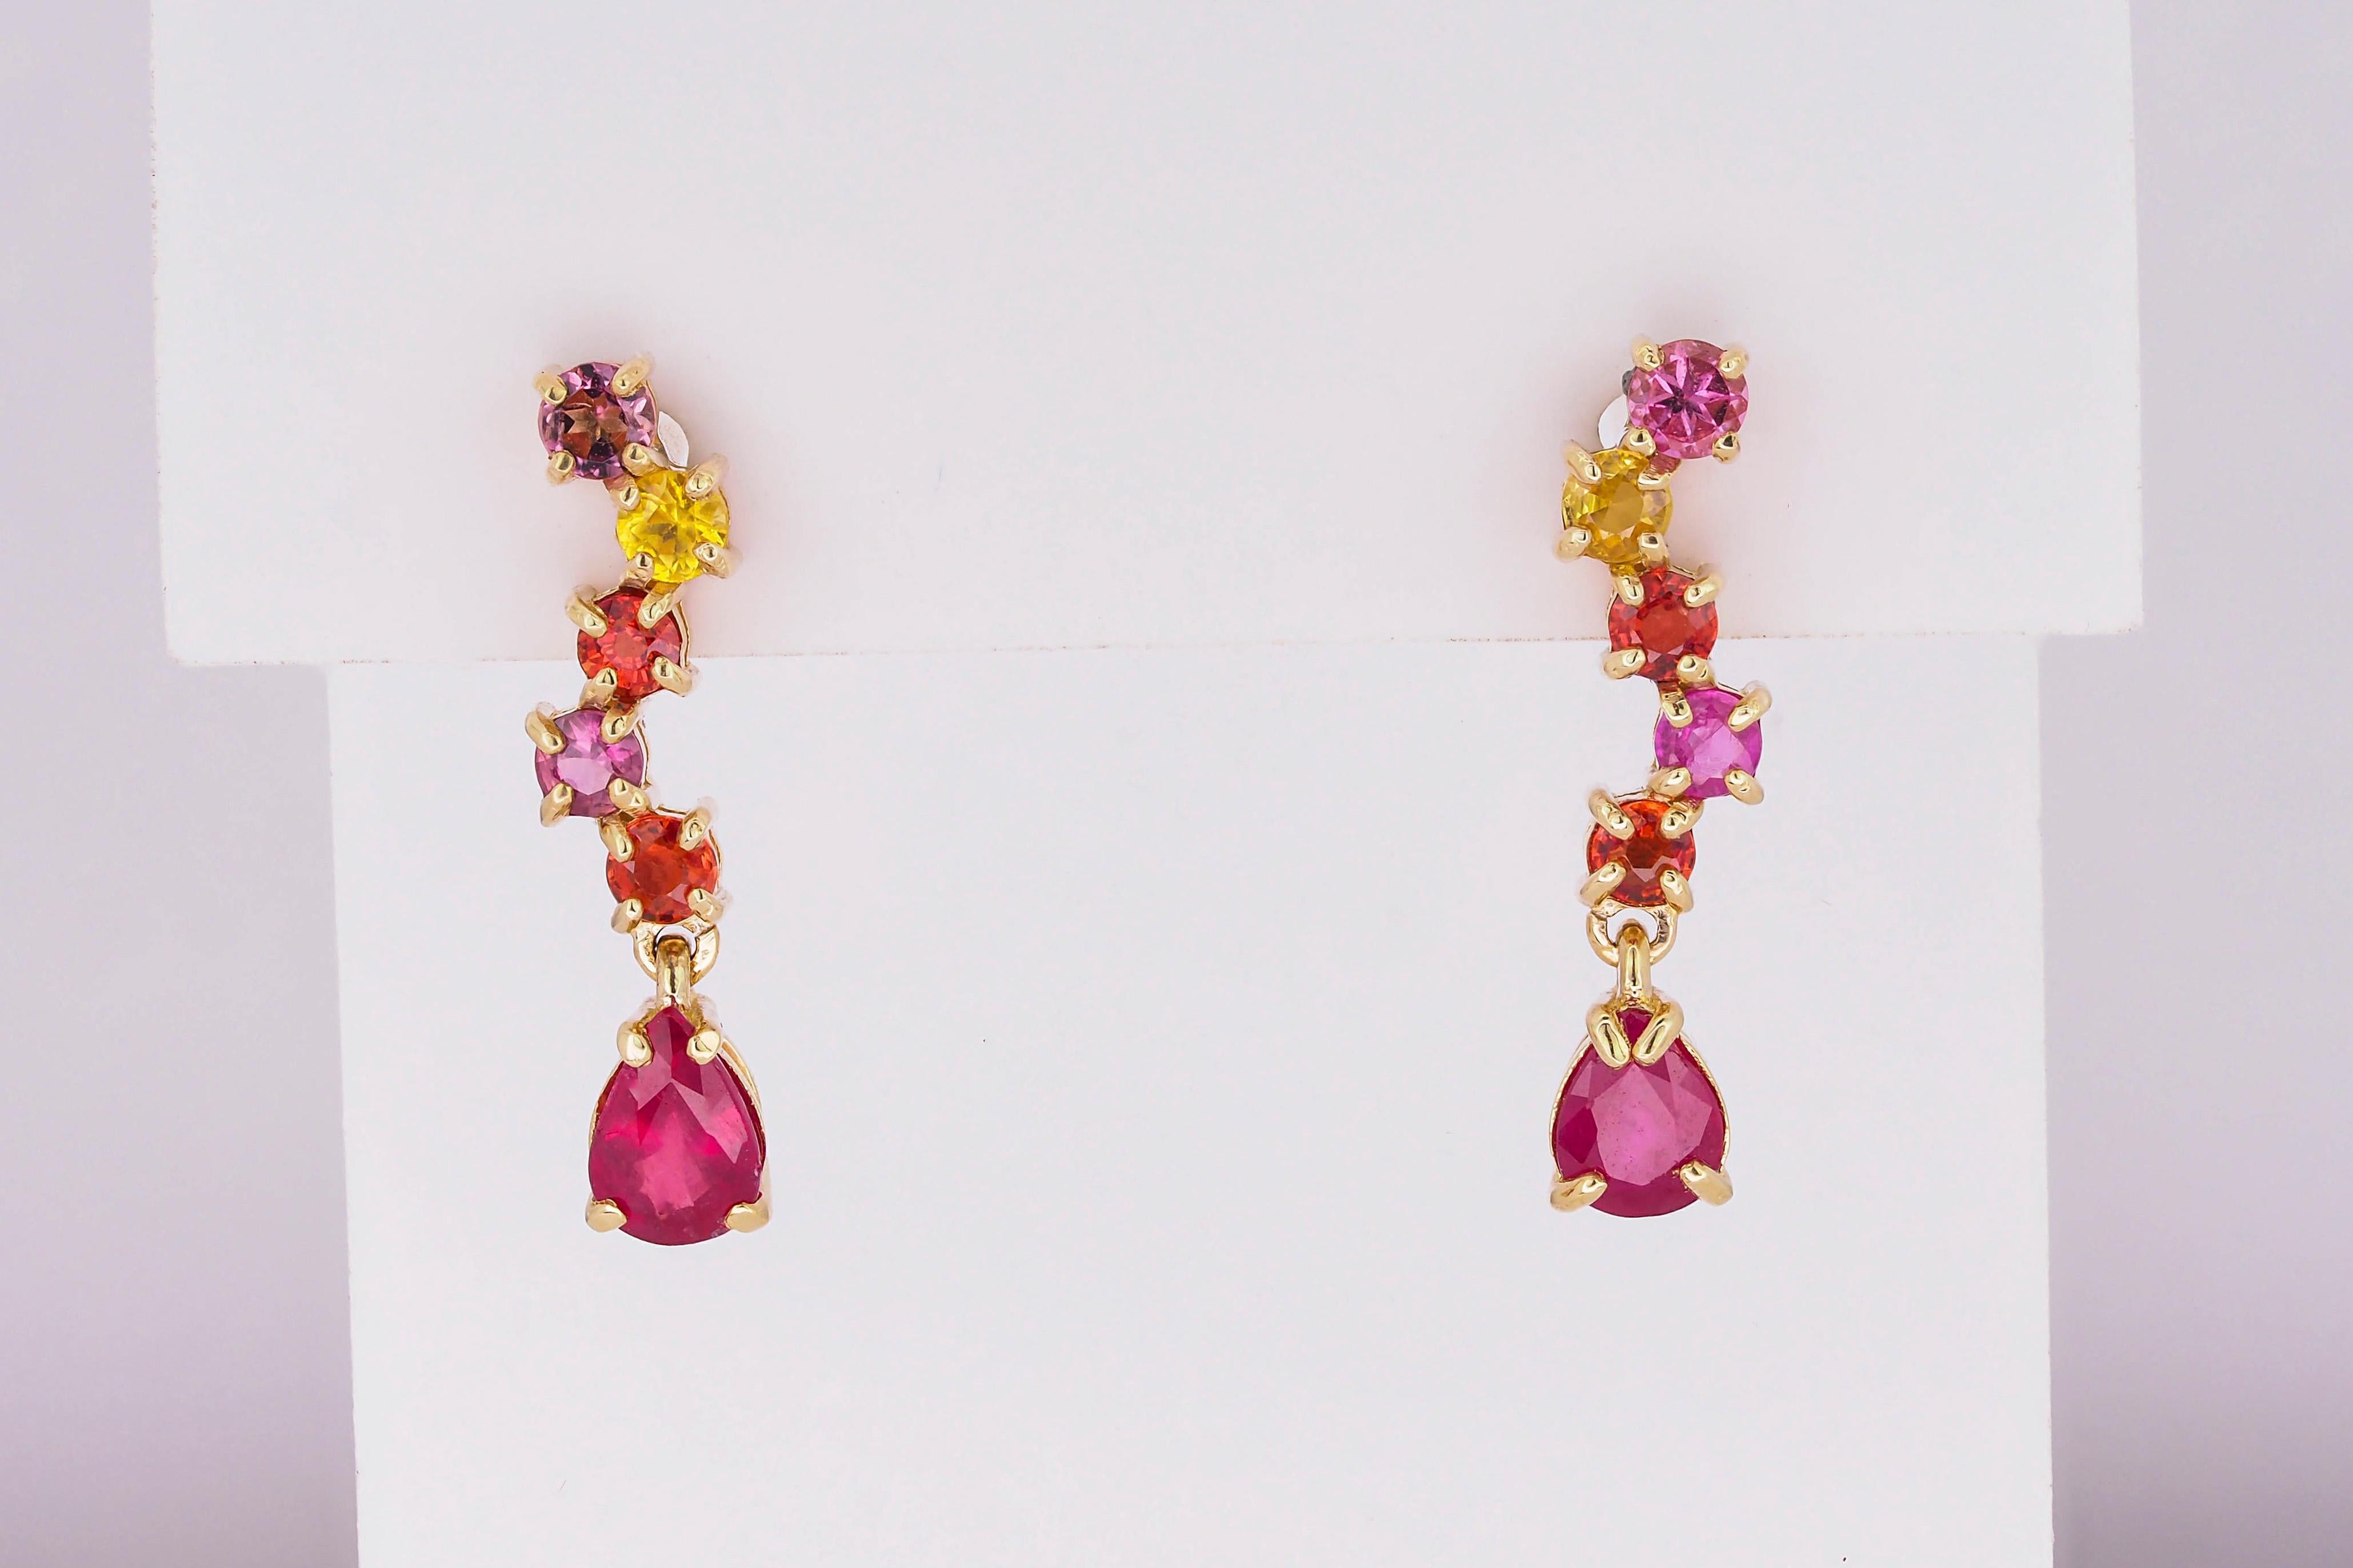 14kt solid gold earrings studs with multicolor natural sapphires and rubies. September birthstone. July birthstone.
Total weight: 2.30 g.
14kt yellow gold.
Size: 20 x 5 mm.

Central stones: Natural rubies - 2 pieces
Weight: approx 1.20 ct. total,